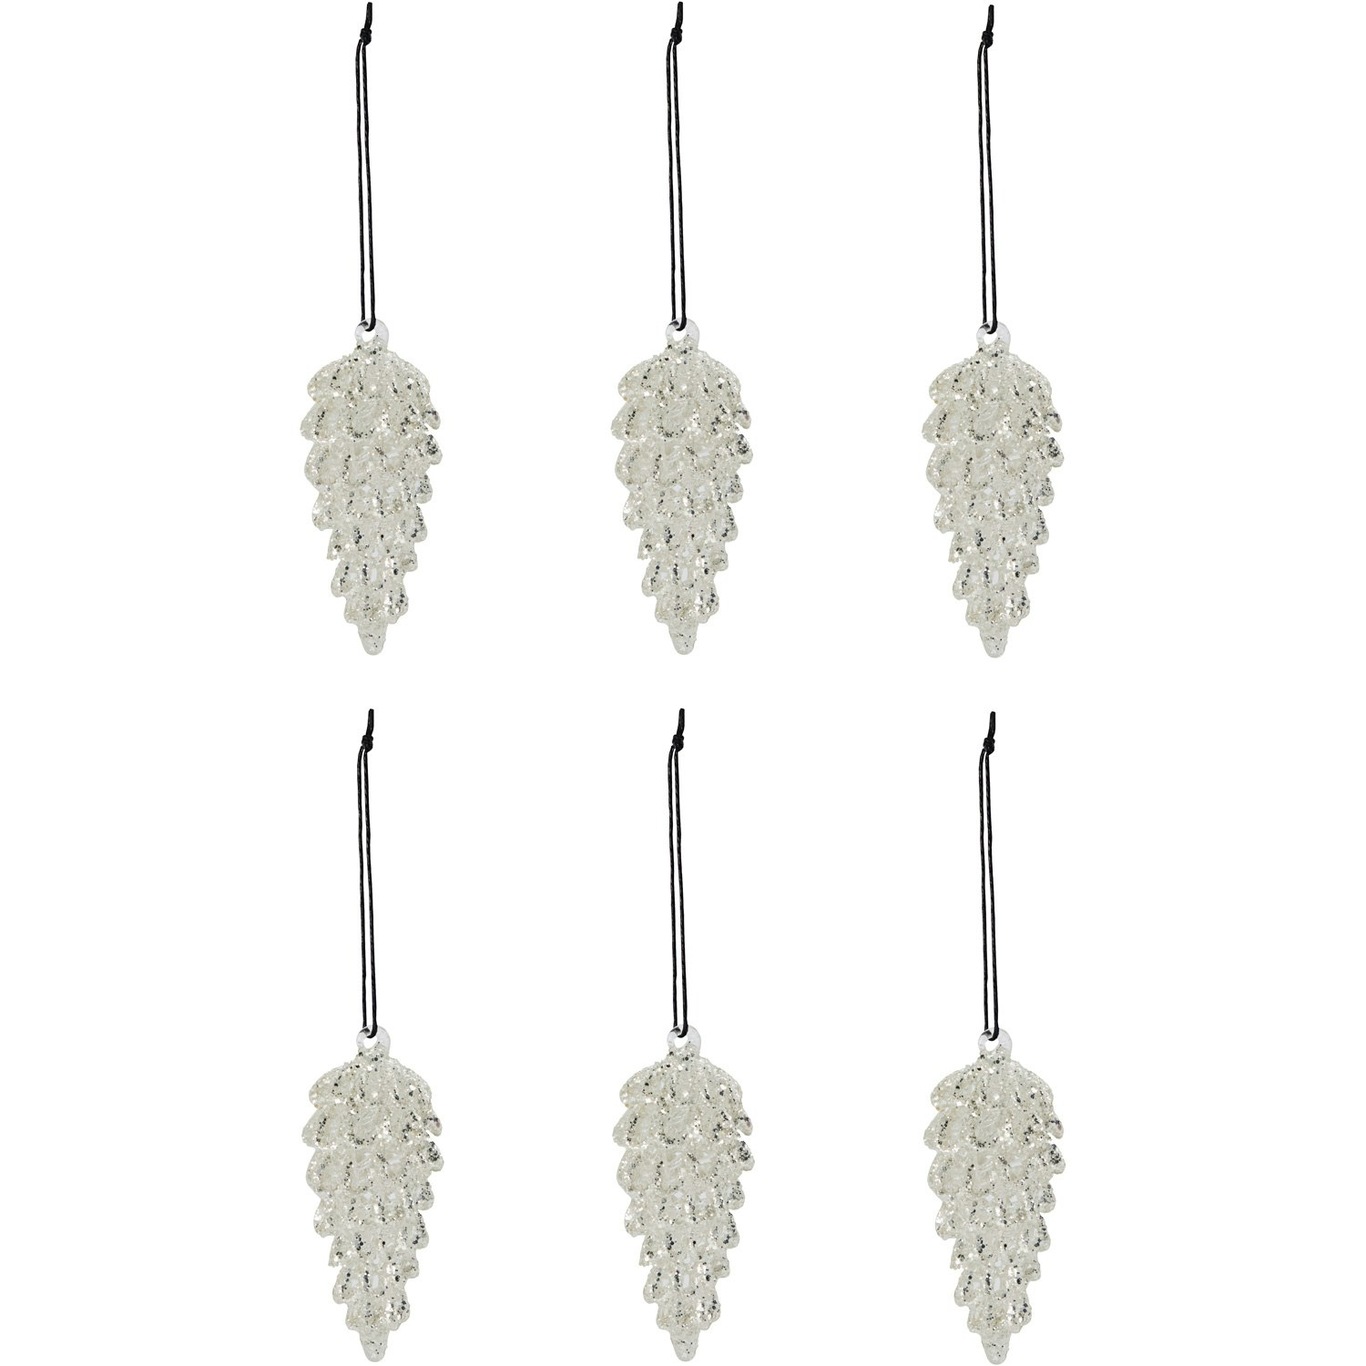 Cone Christmas Decorations 6-pack 3,5x9 cm, Silver